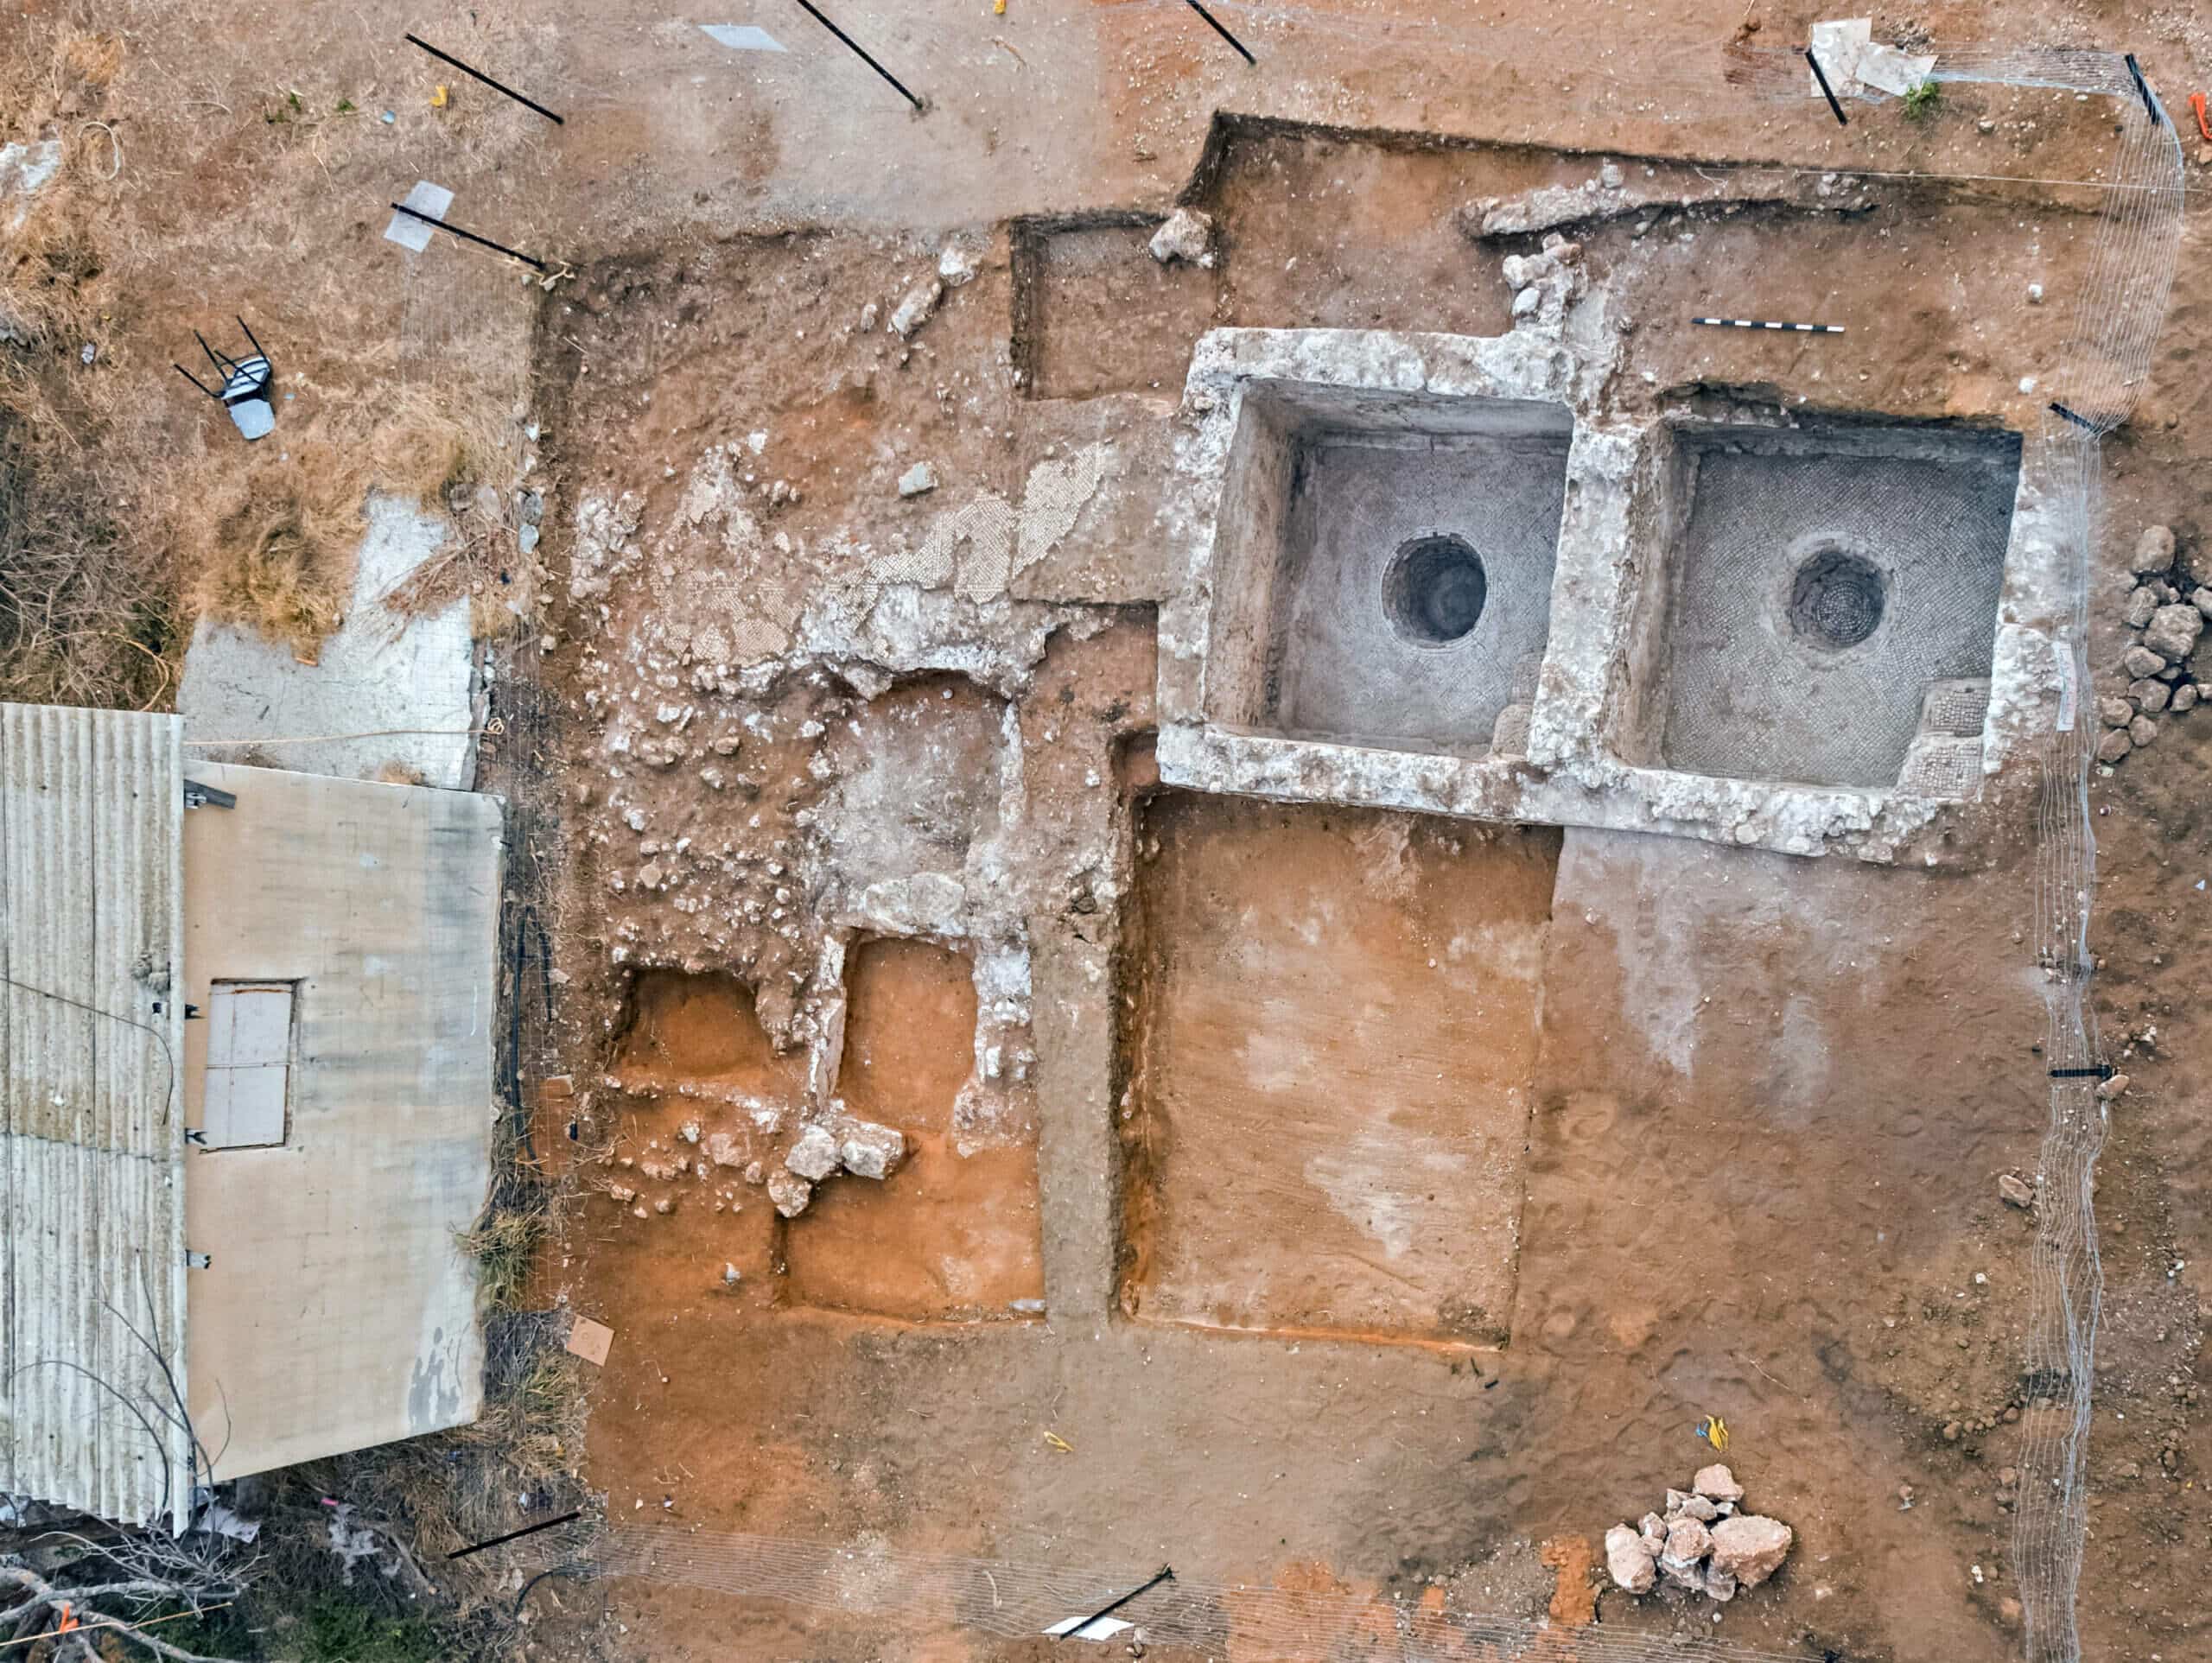 An aerial view of Geth in the archaeological dig of the Antiquities Authority in Ramat Hasharon. Photograph collected by Asaf Peretz of the Antiquities Authority